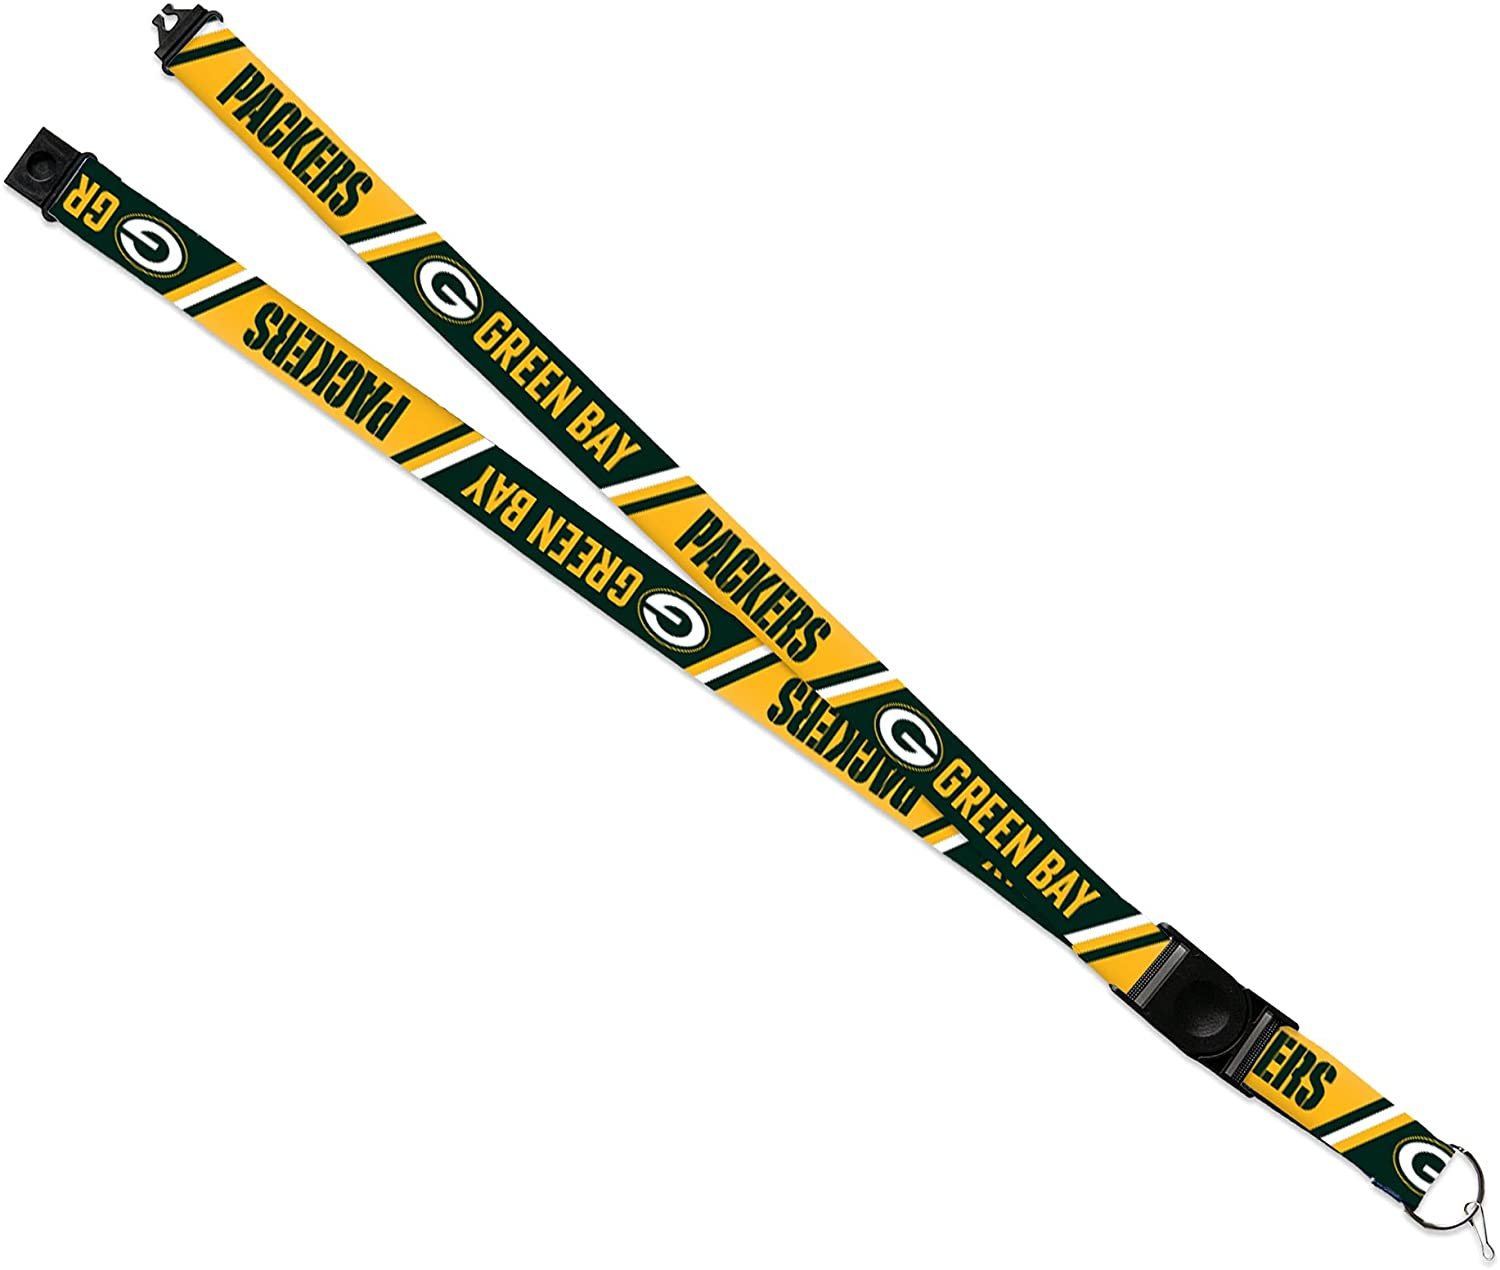 Green Bay Packers Lanyard Keychain Double Sided Breakaway Safety Design Adult 18 Inch